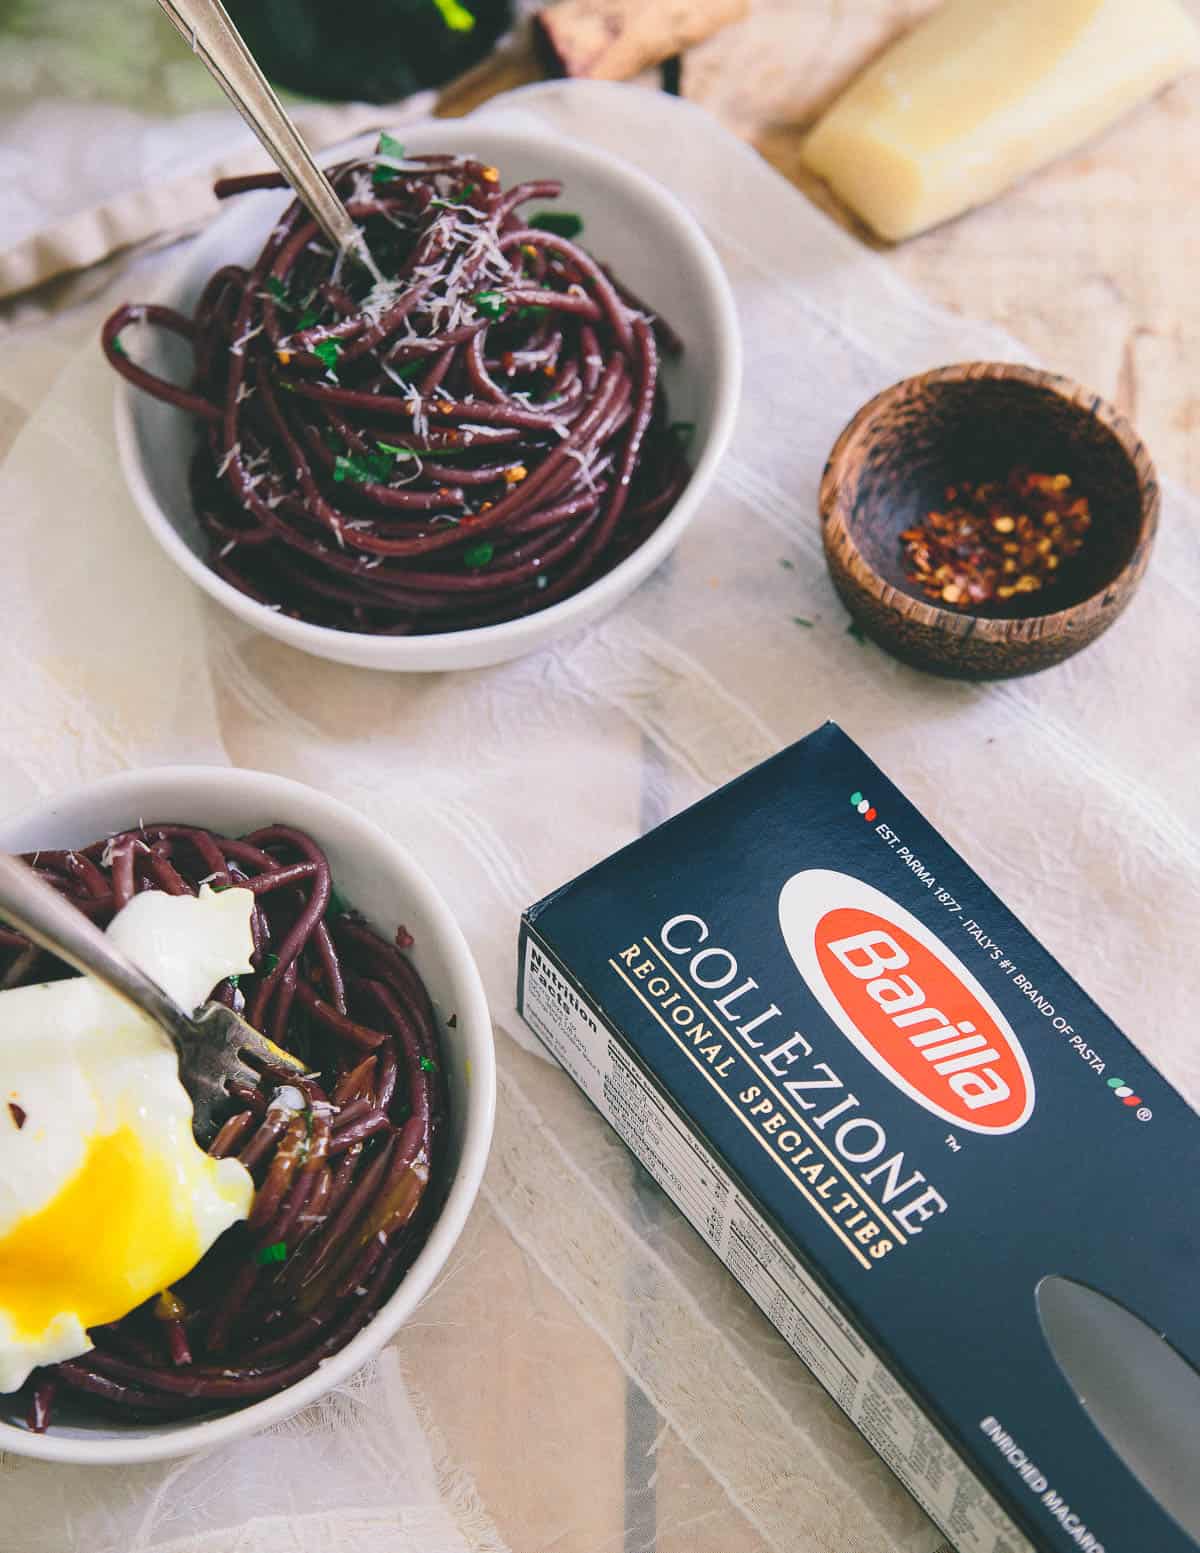 Red Wine Garlic Bucatini is an easy weeknight meal with a simplistic elegance.